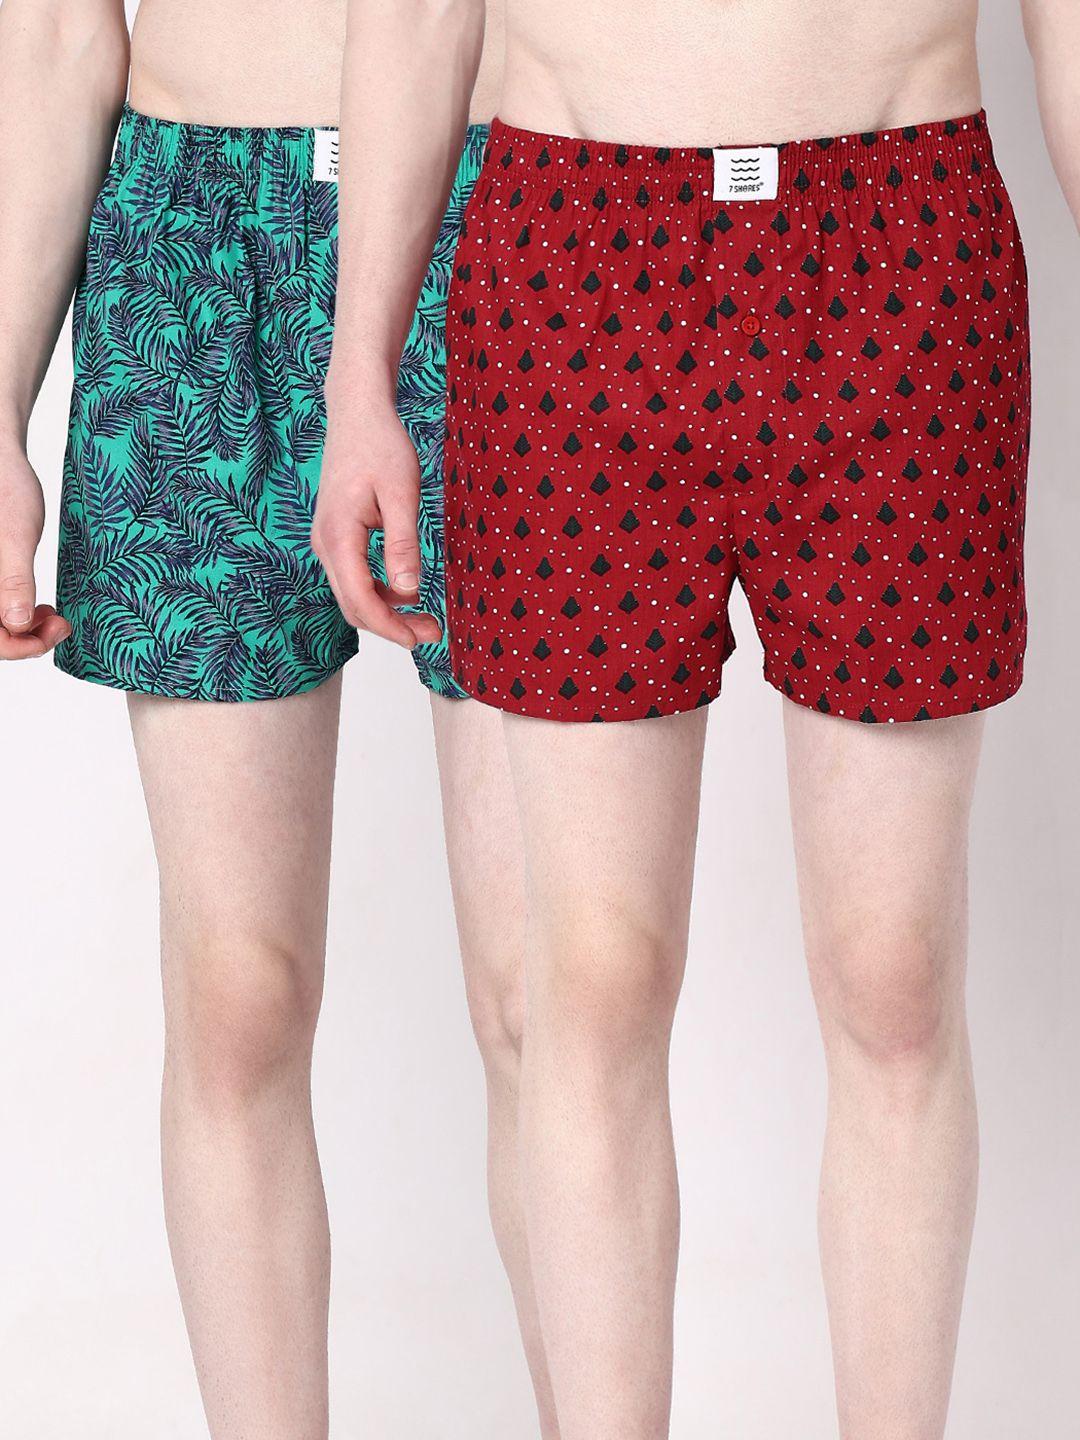 7shores-pack-of-2-printed-cotton-boxers-bst-001